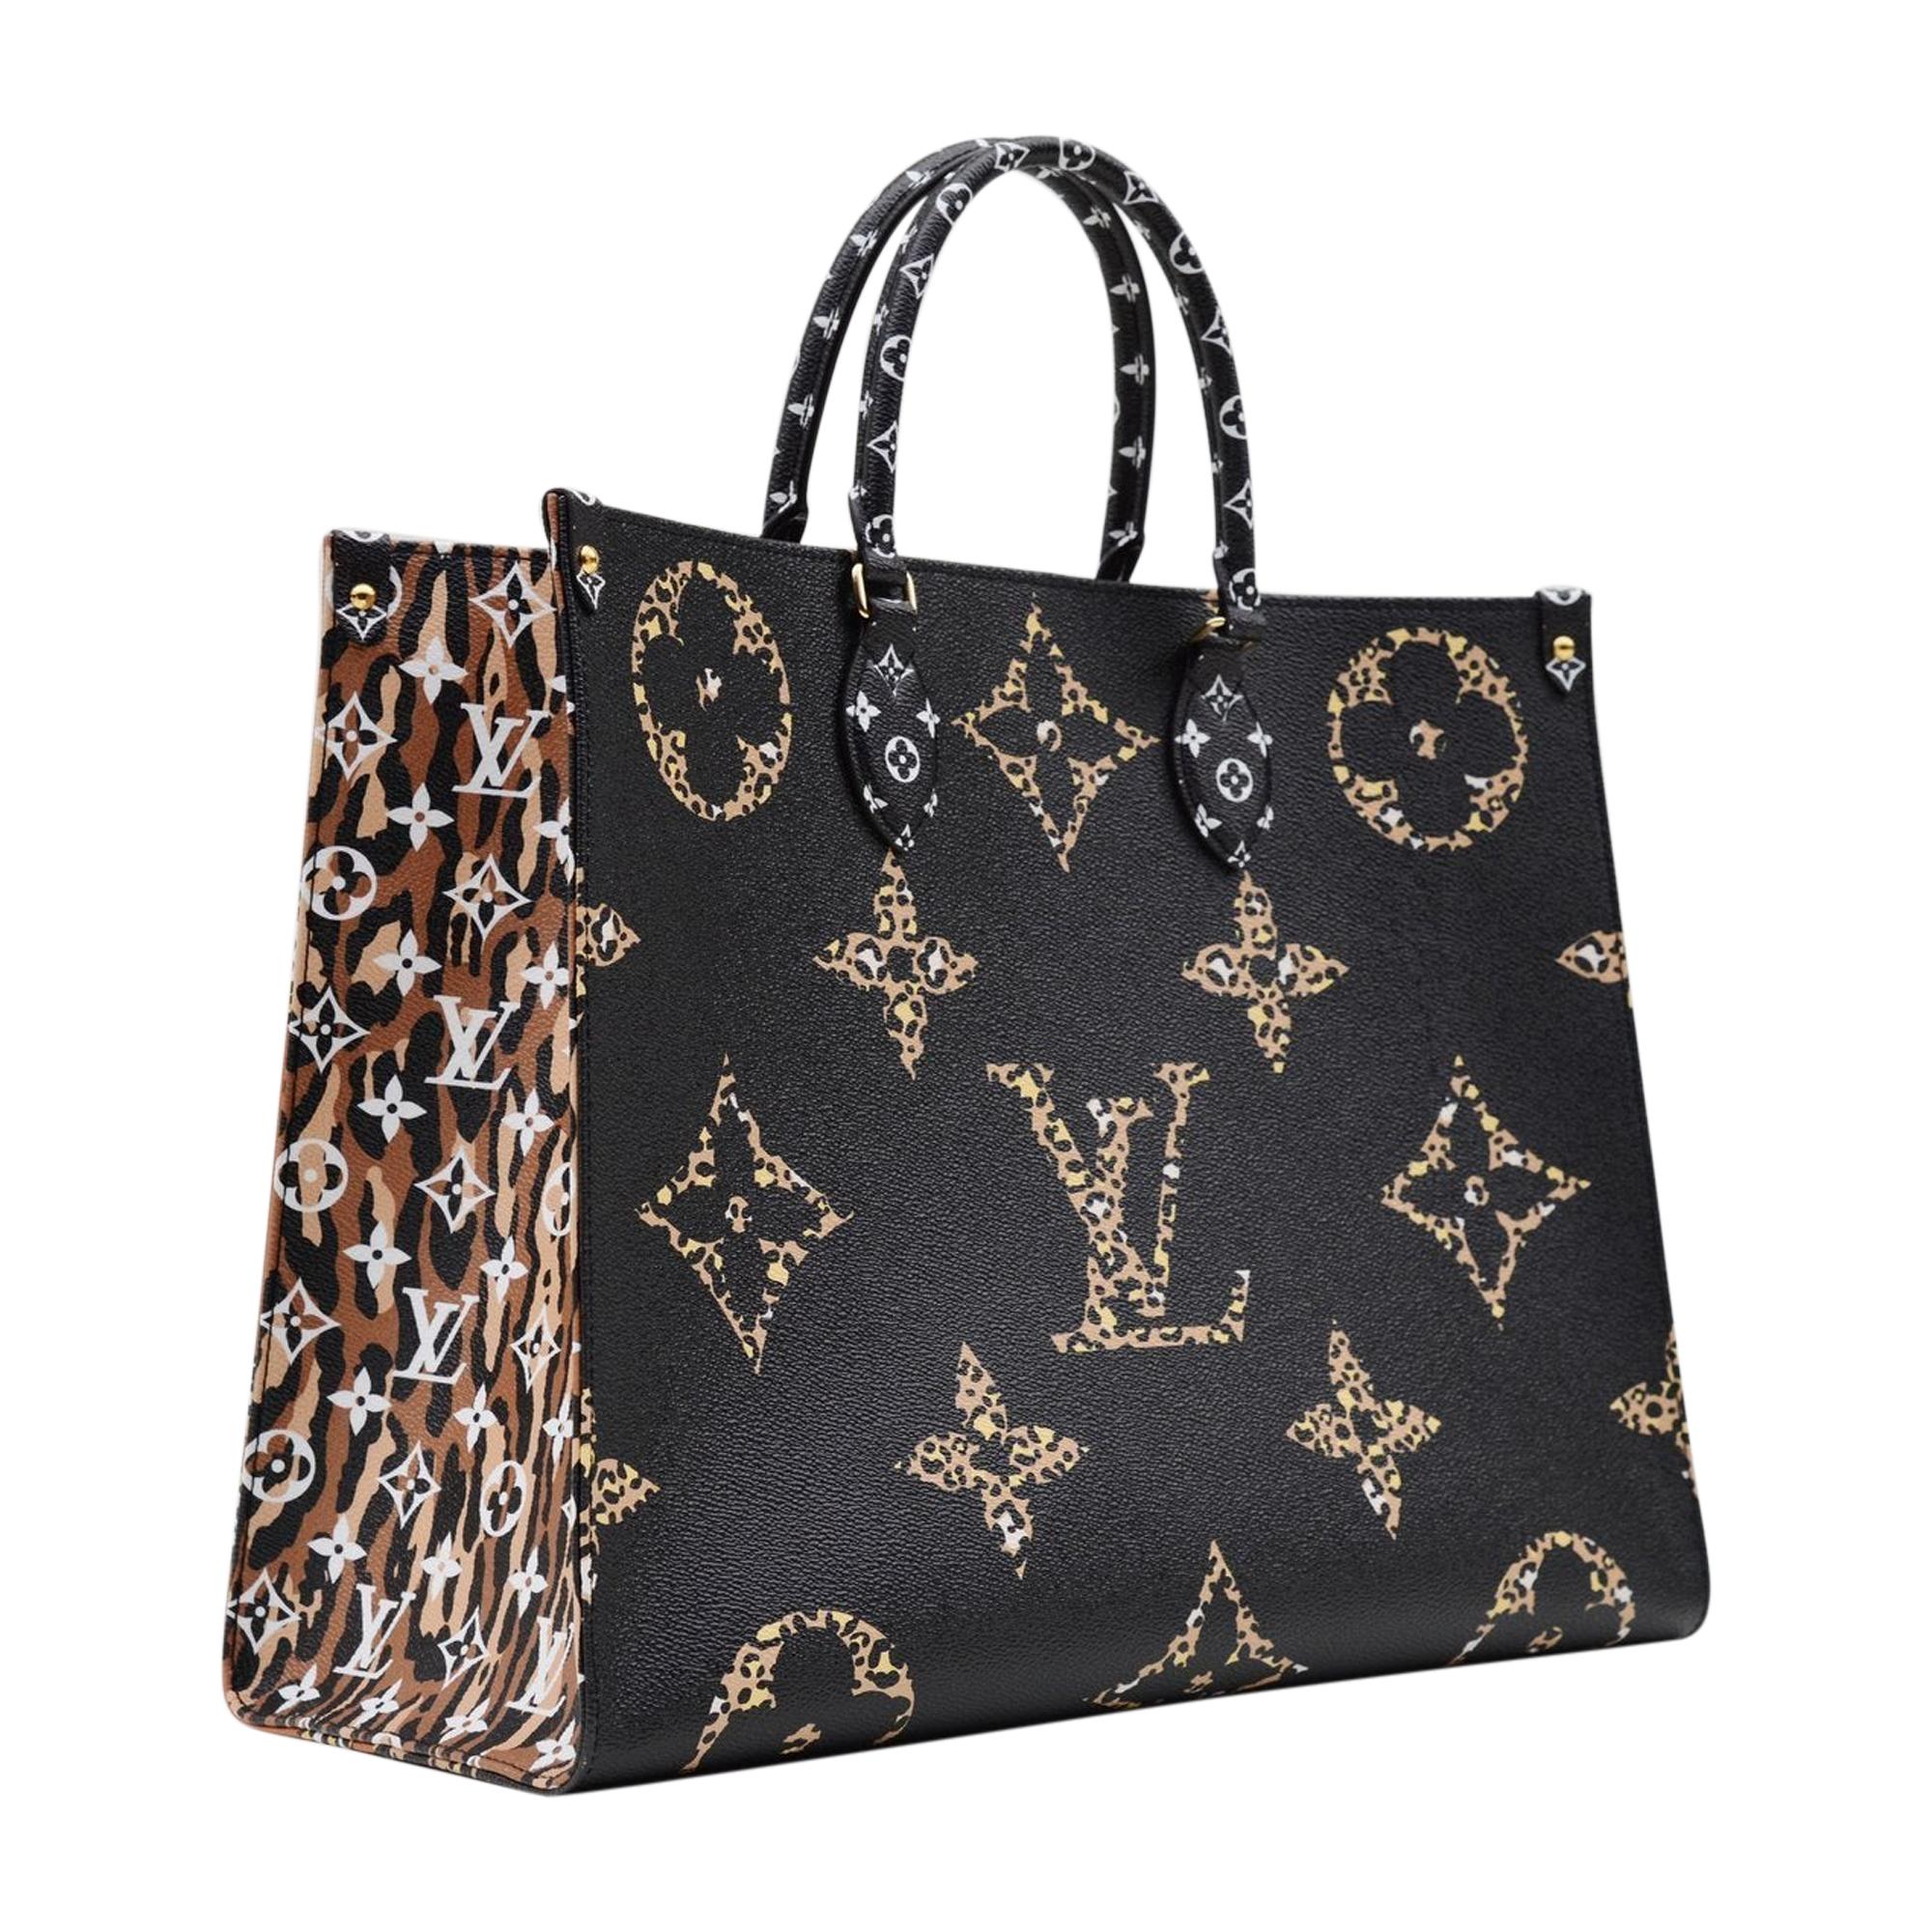 Sold at Auction: Louis Vuitton New Jungle Neverfull Leather Tote